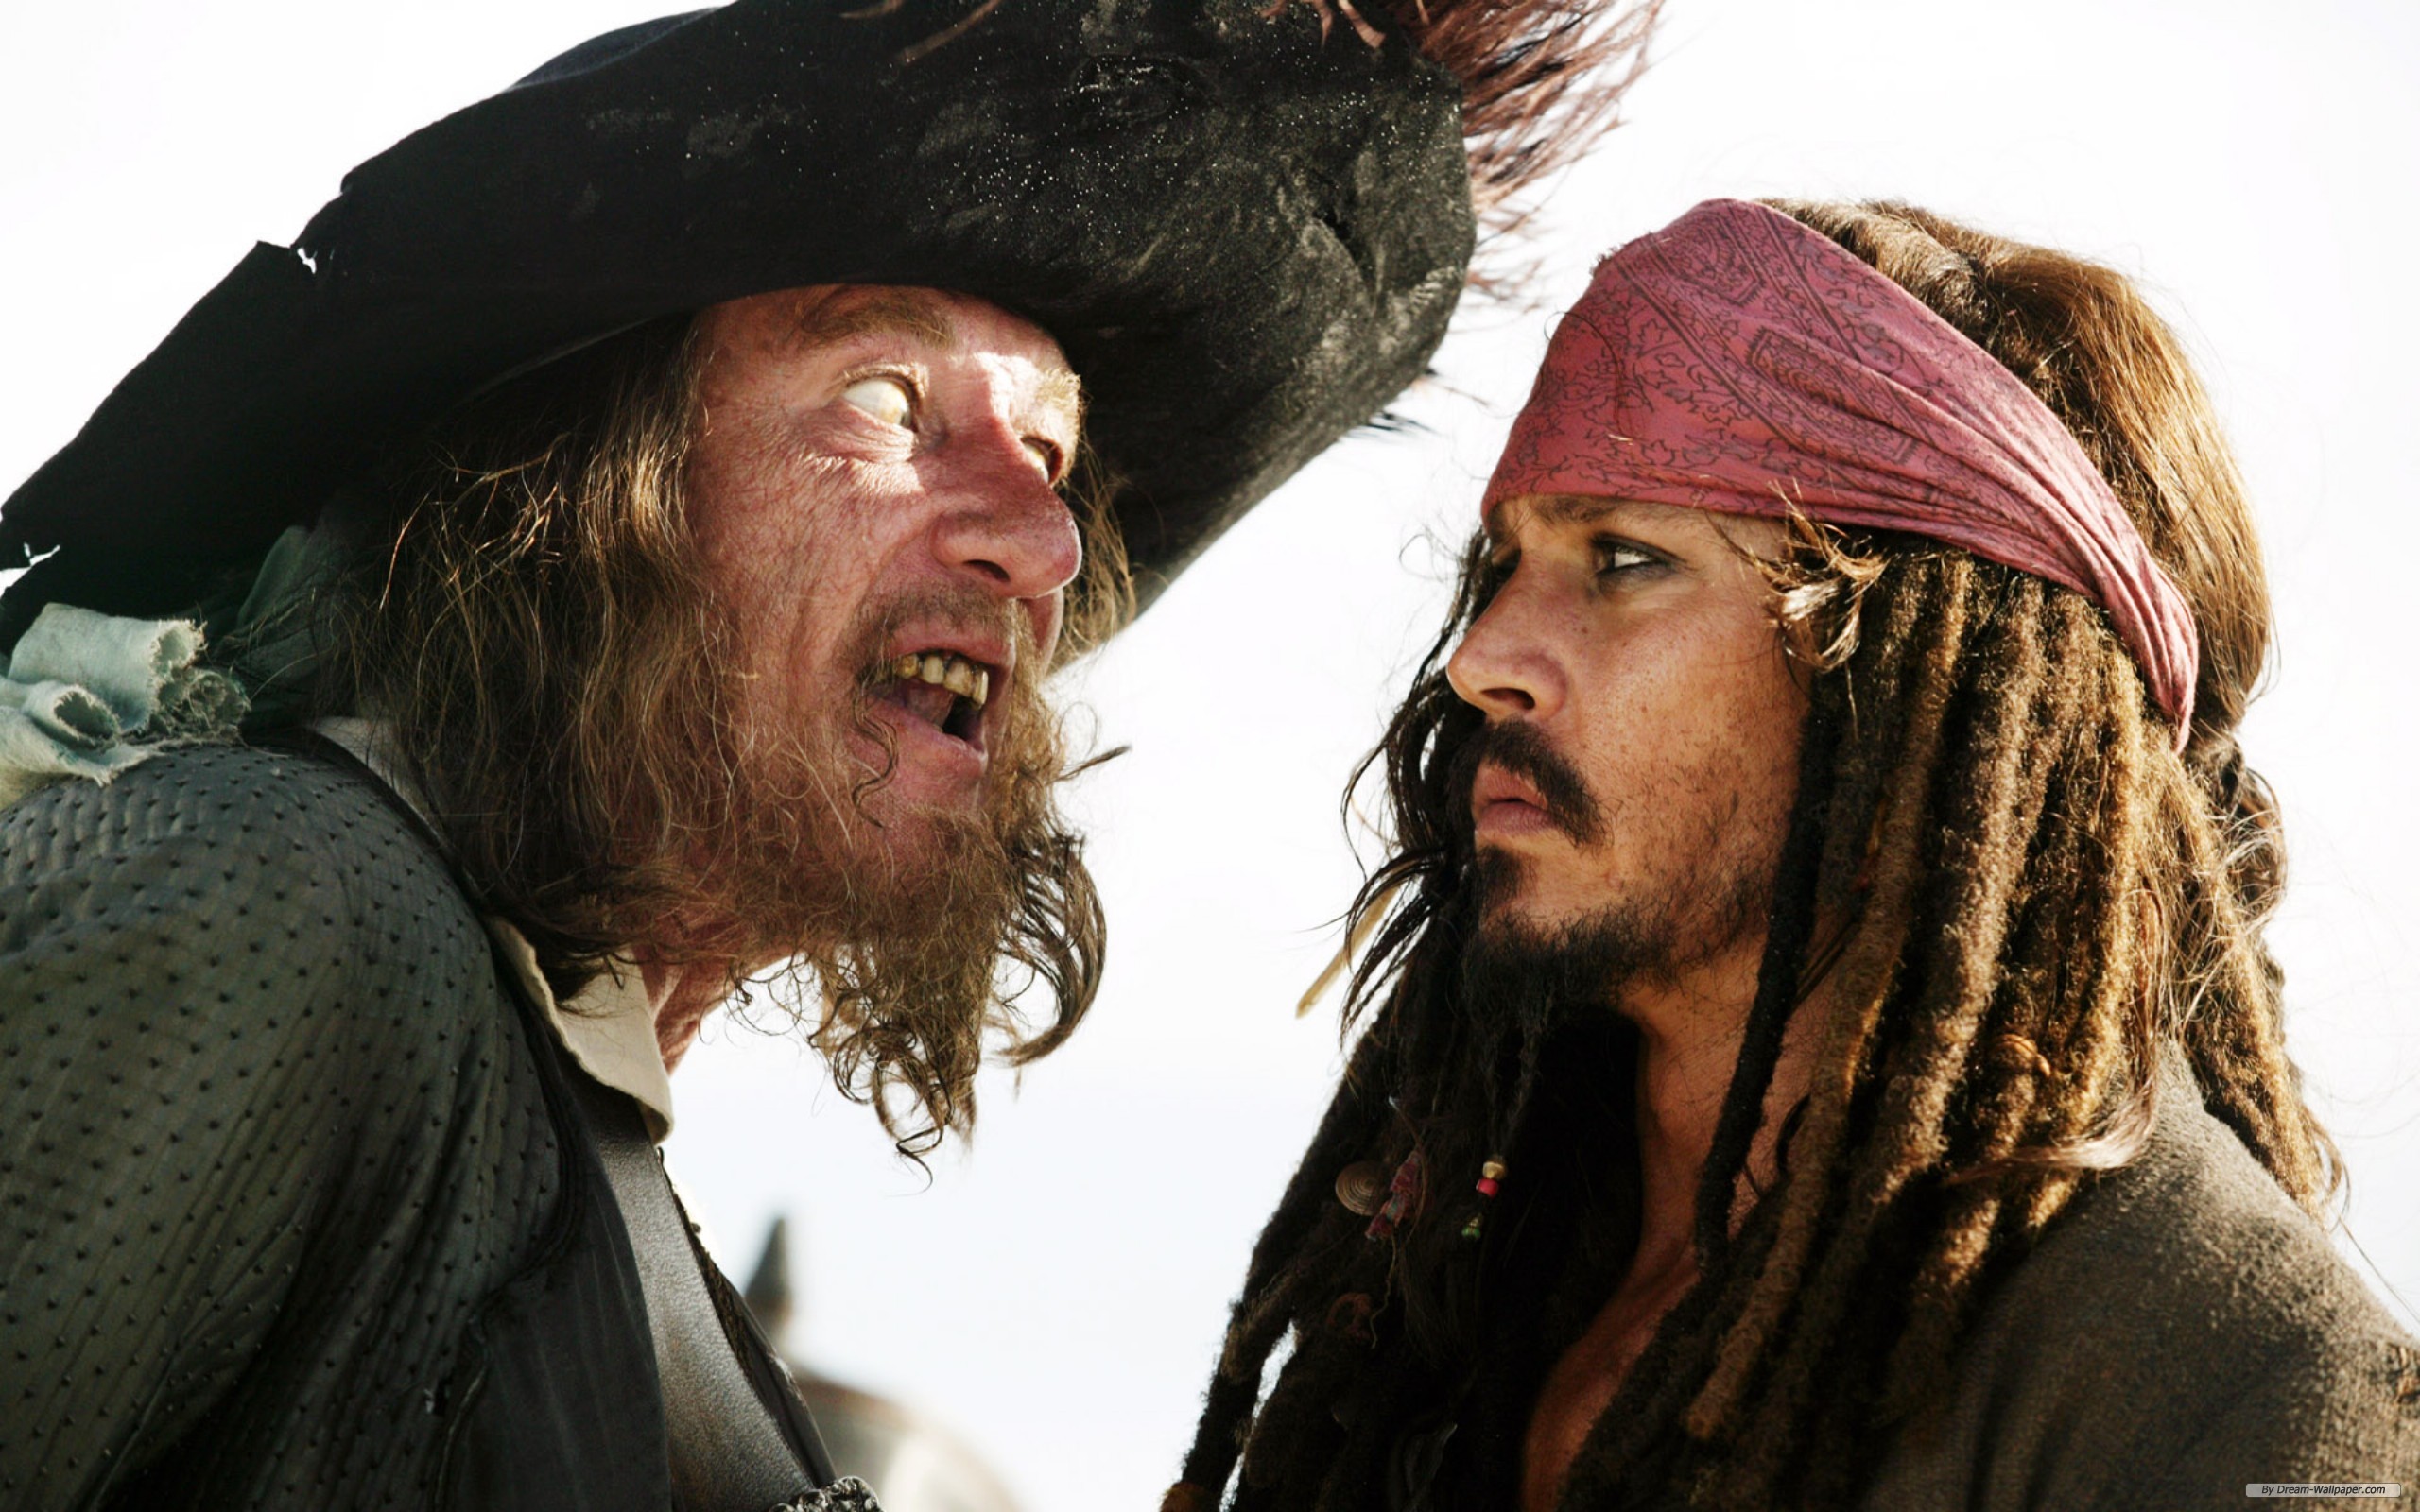 movie, pirates of the caribbean: at world's end, geoffrey rush, hector barbossa, jack sparrow, johnny depp, pirates of the caribbean